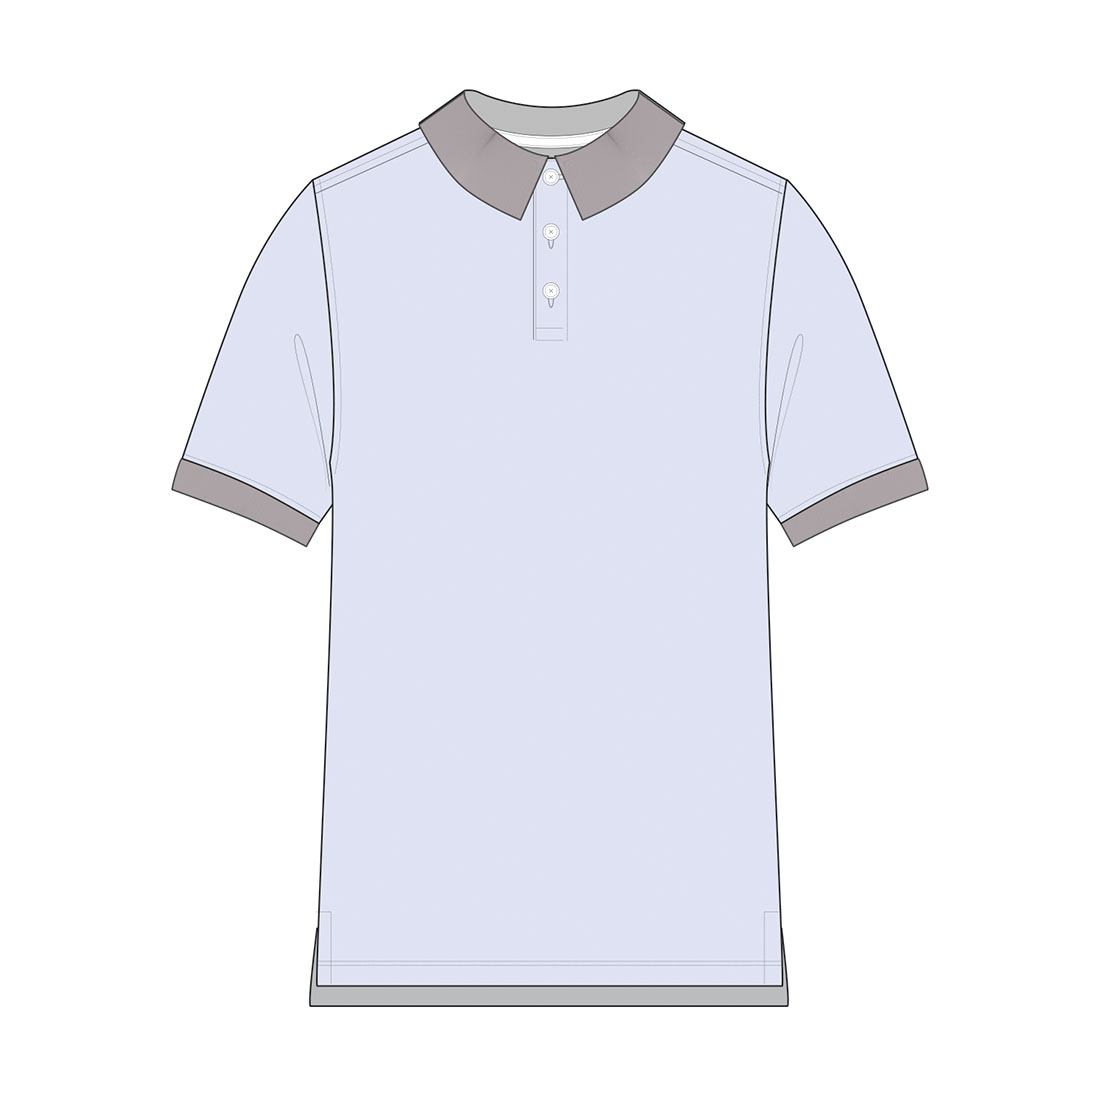 Real School Uniforms Short Sleeve Pullover Collared Regular Polo (Big Boys or Little Boys), 1 Pack - image 3 of 3